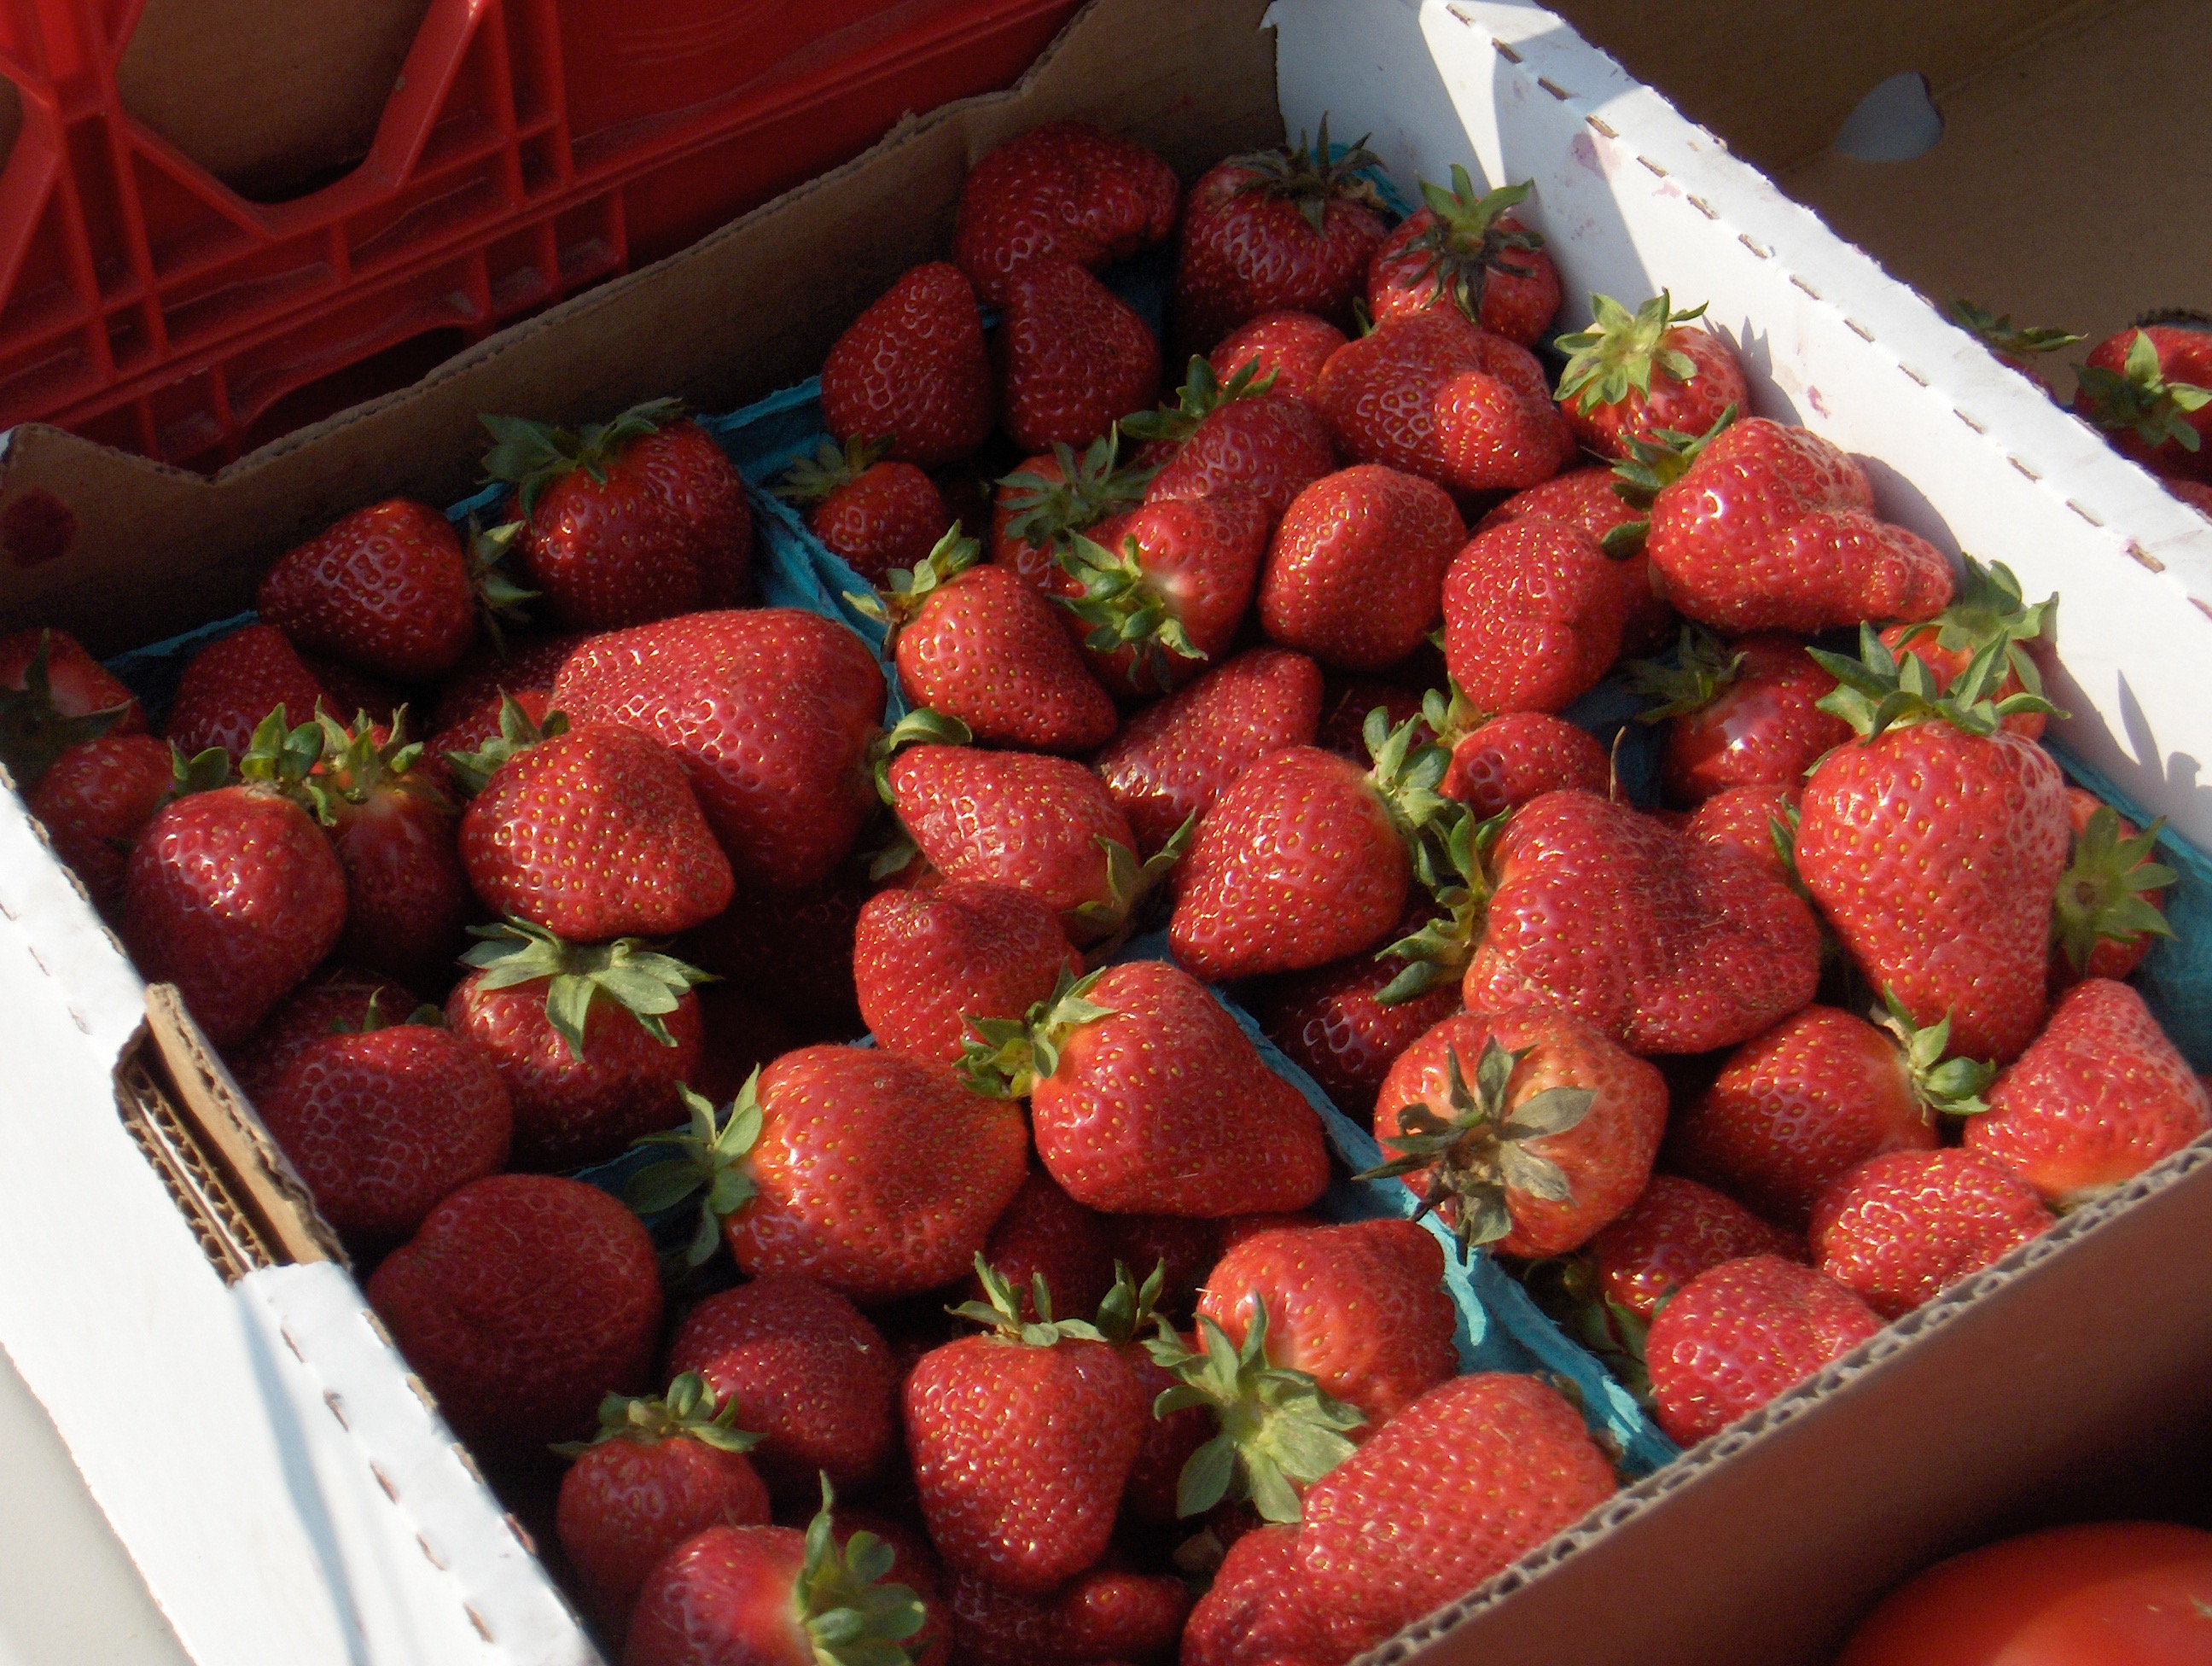 Image of locally grown strawberries